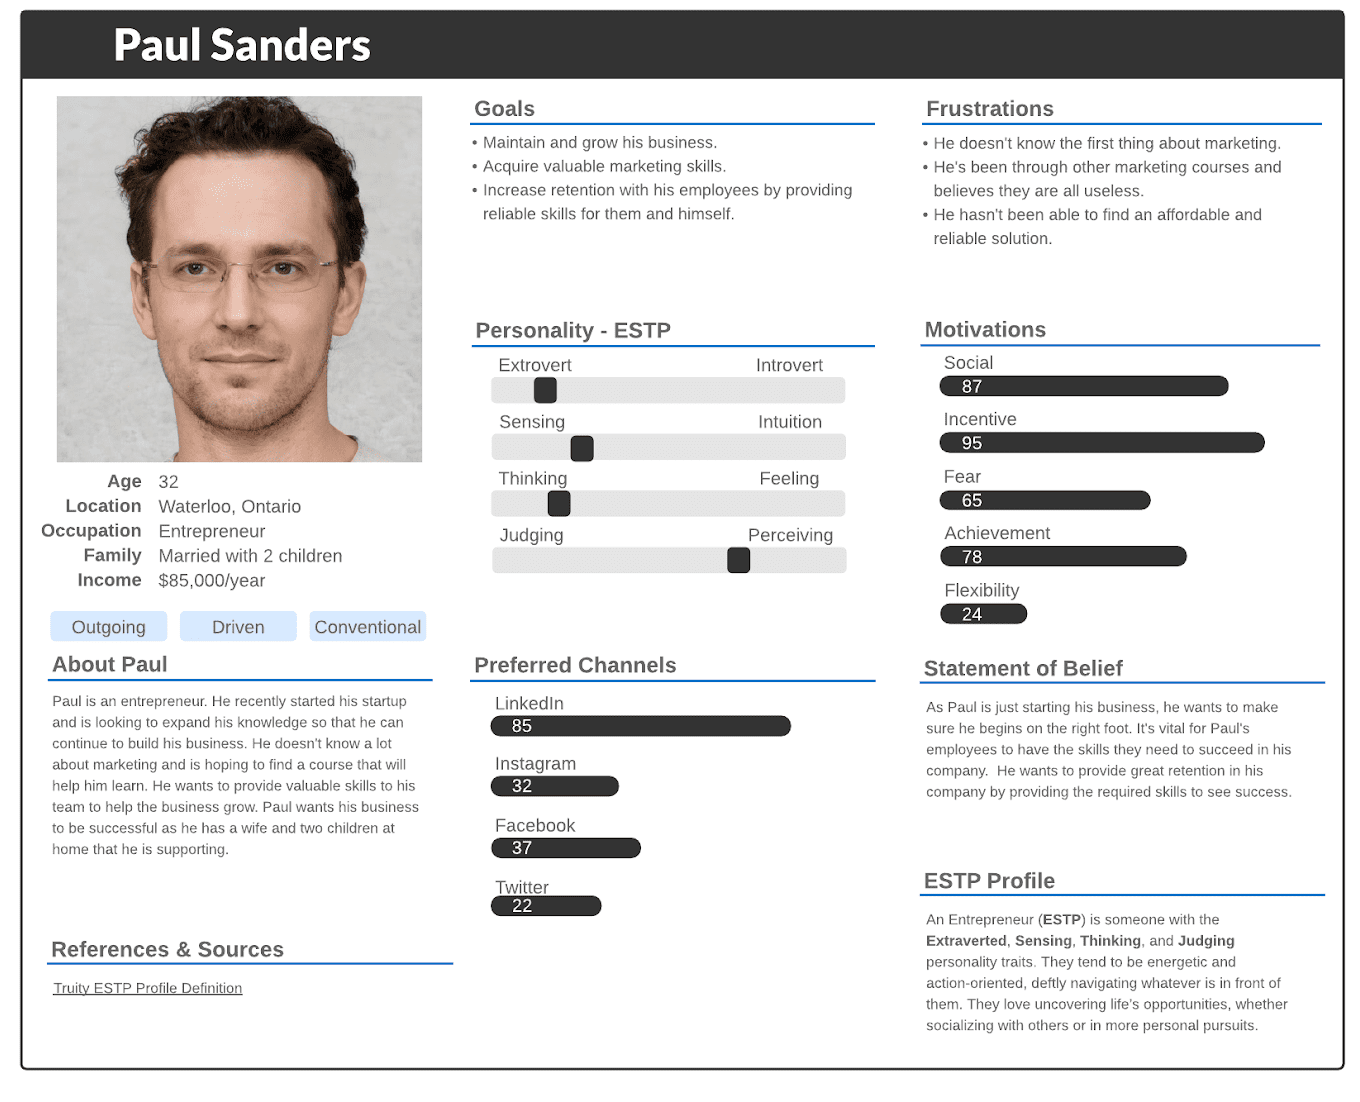 image of a customer persona card.